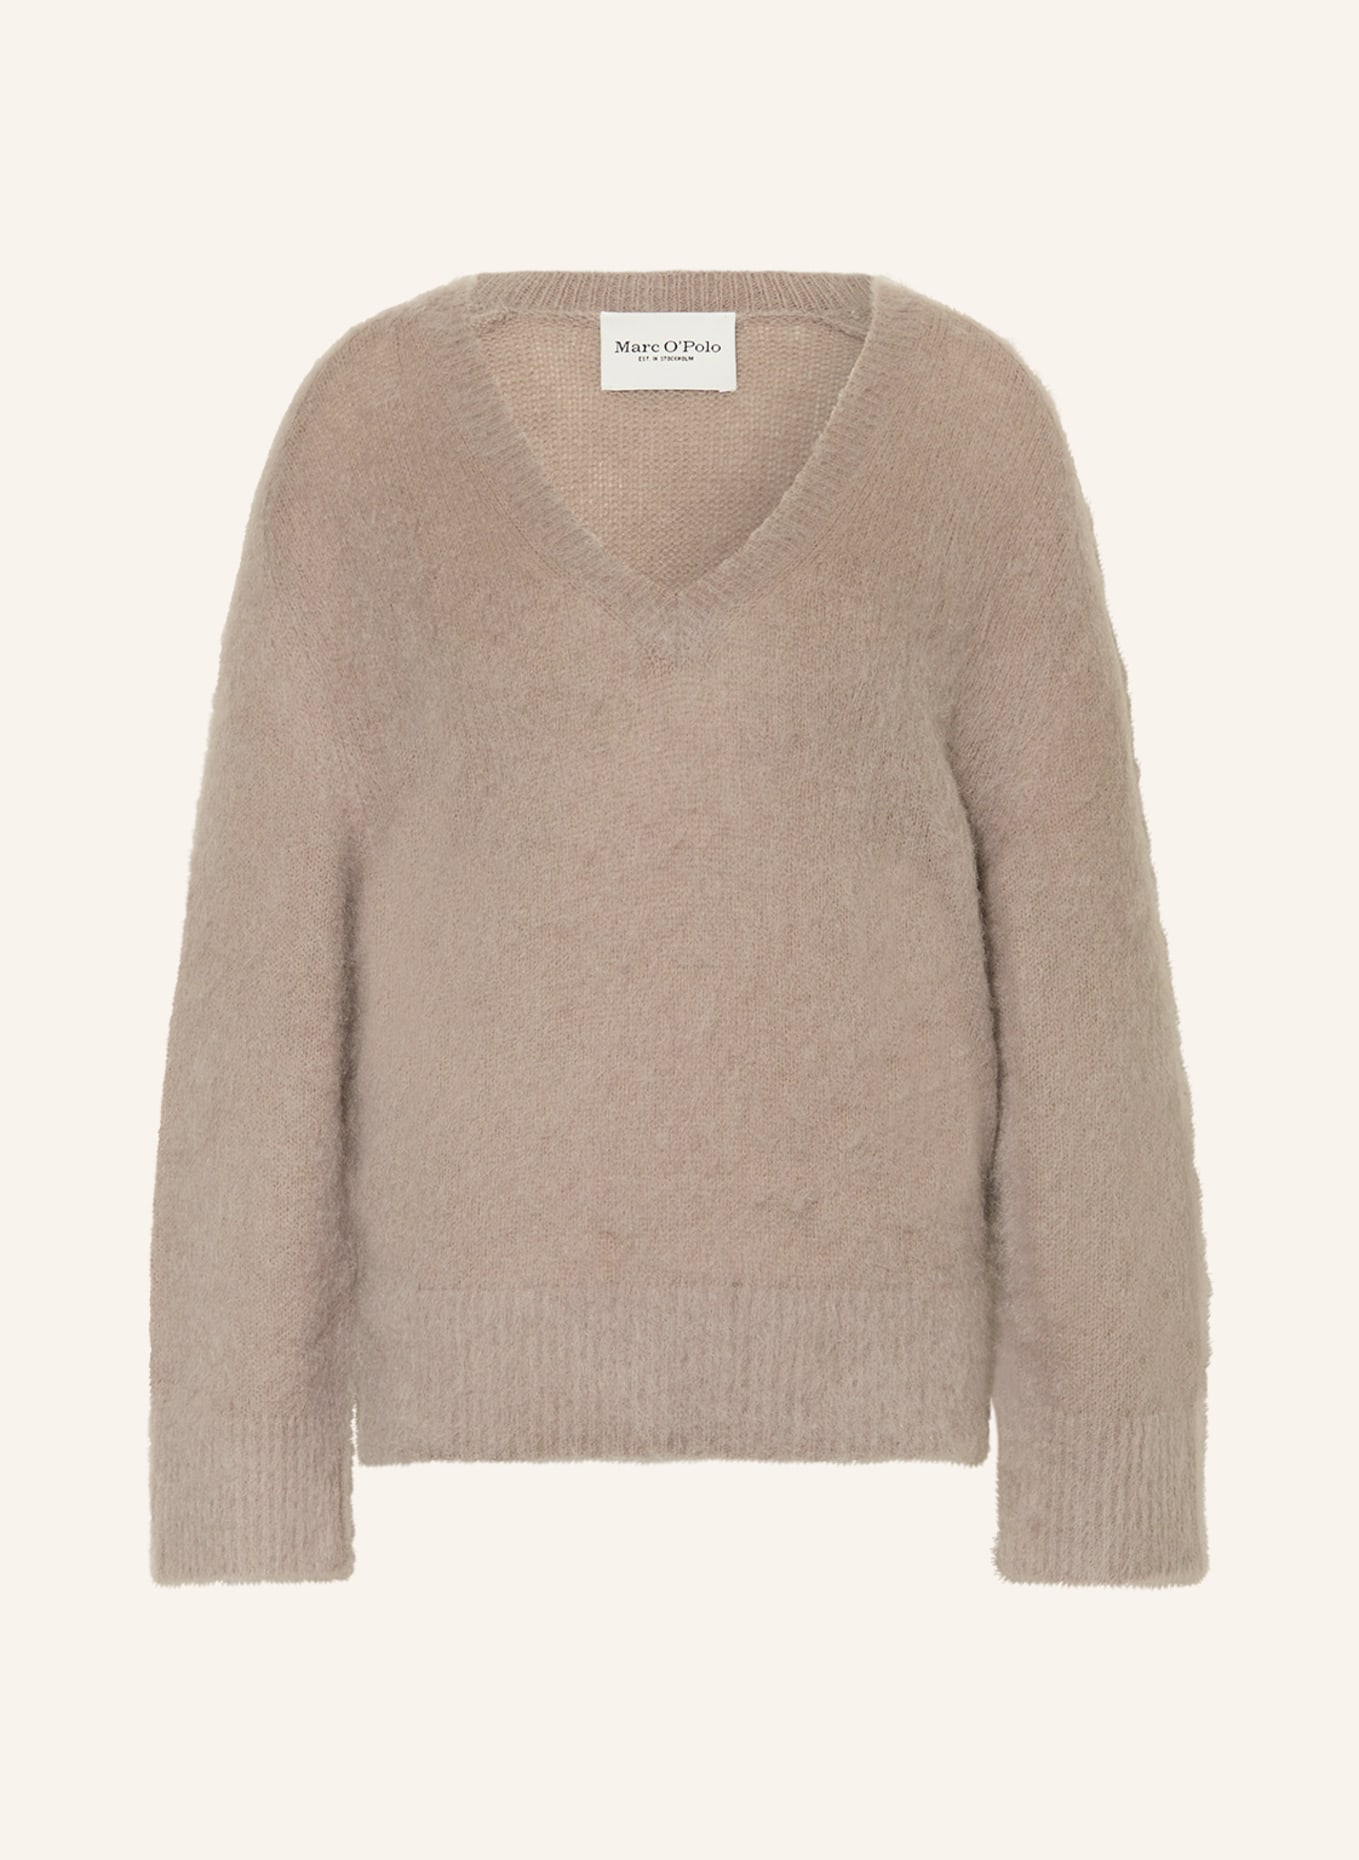 Marc O'Polo Pullover mit Mohair, Farbe: TAUPE (Bild 1)